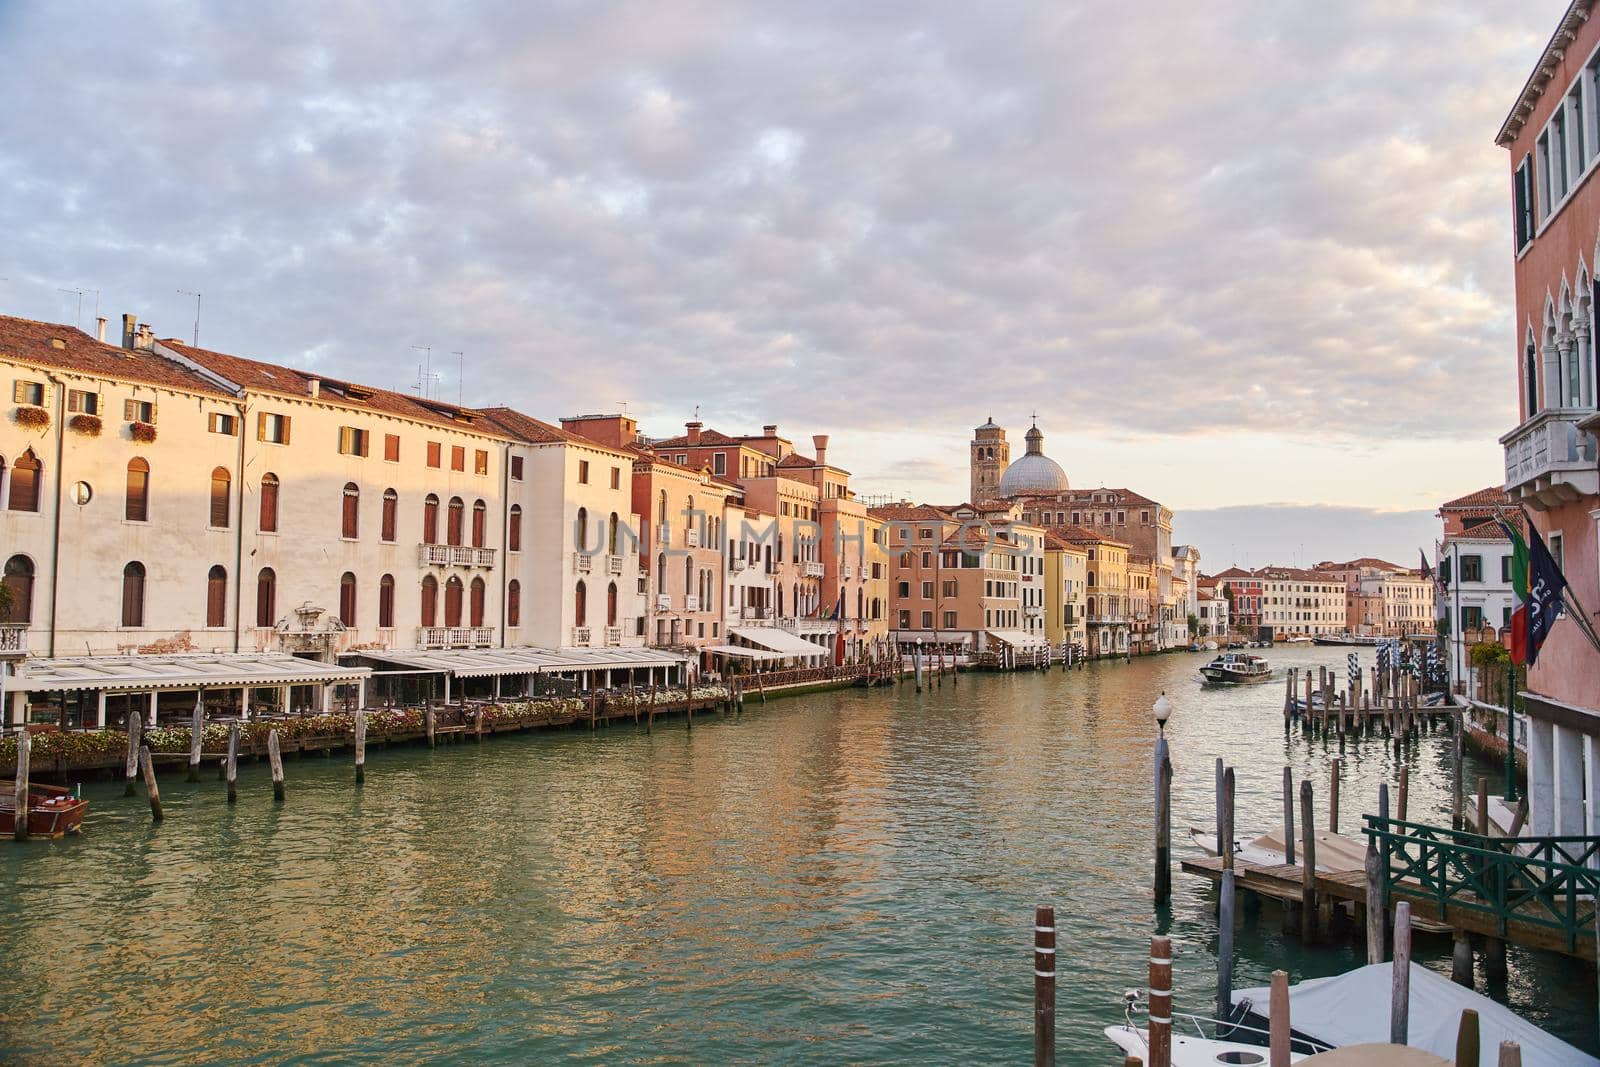 Venice, Italy - 10.12.2021: Beautiful view of famous Grand Canal in Venice, Italy.